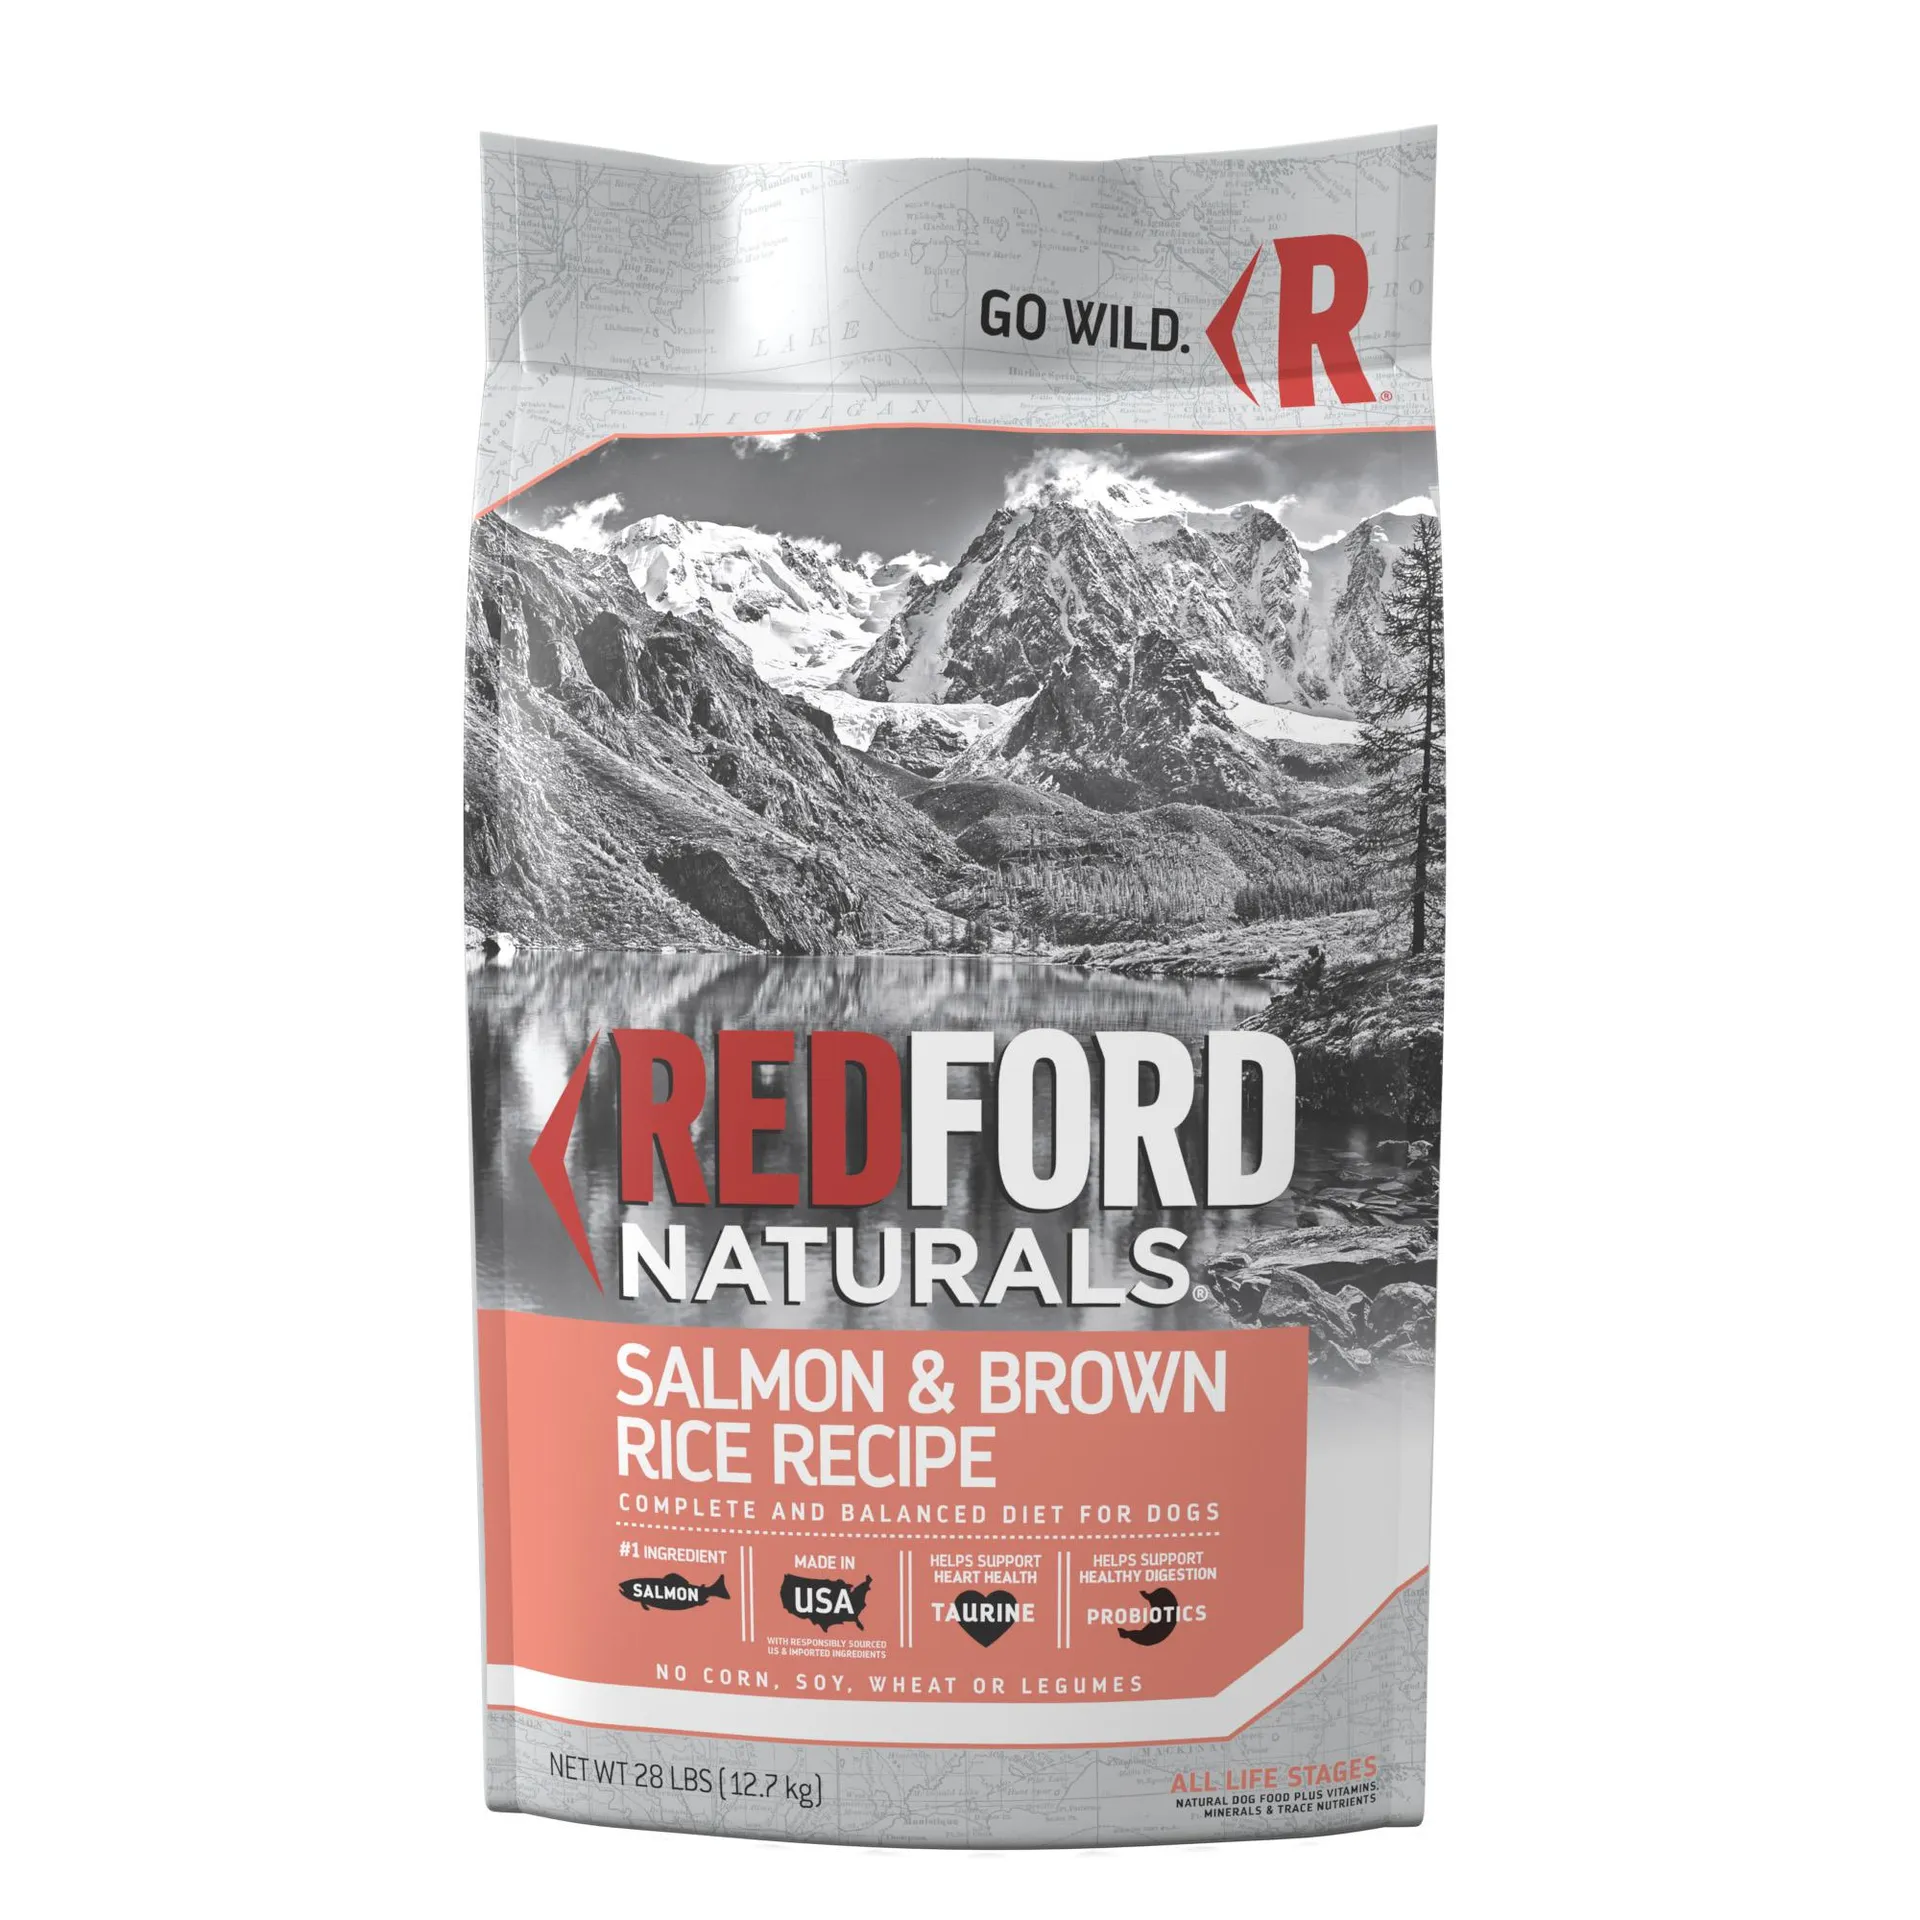 Redford Naturals Salmon & Brown Rice Recipe Dog Food, 28 Pounds